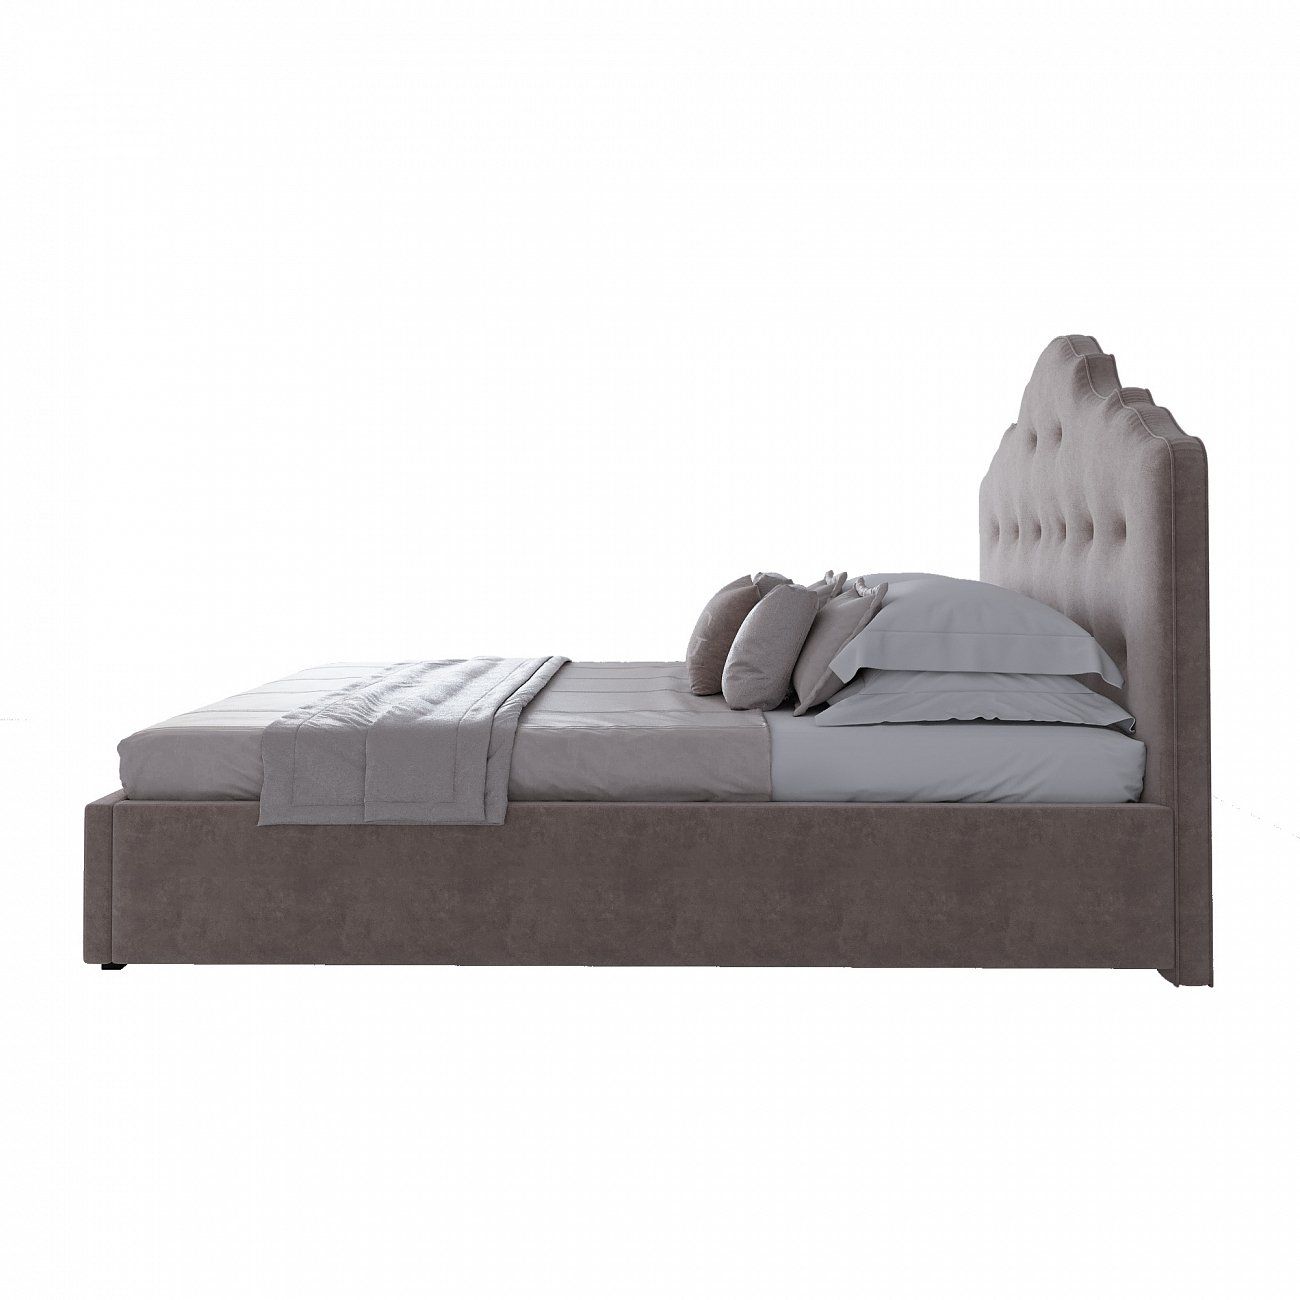 Double bed 160x200 grey-brown Palace